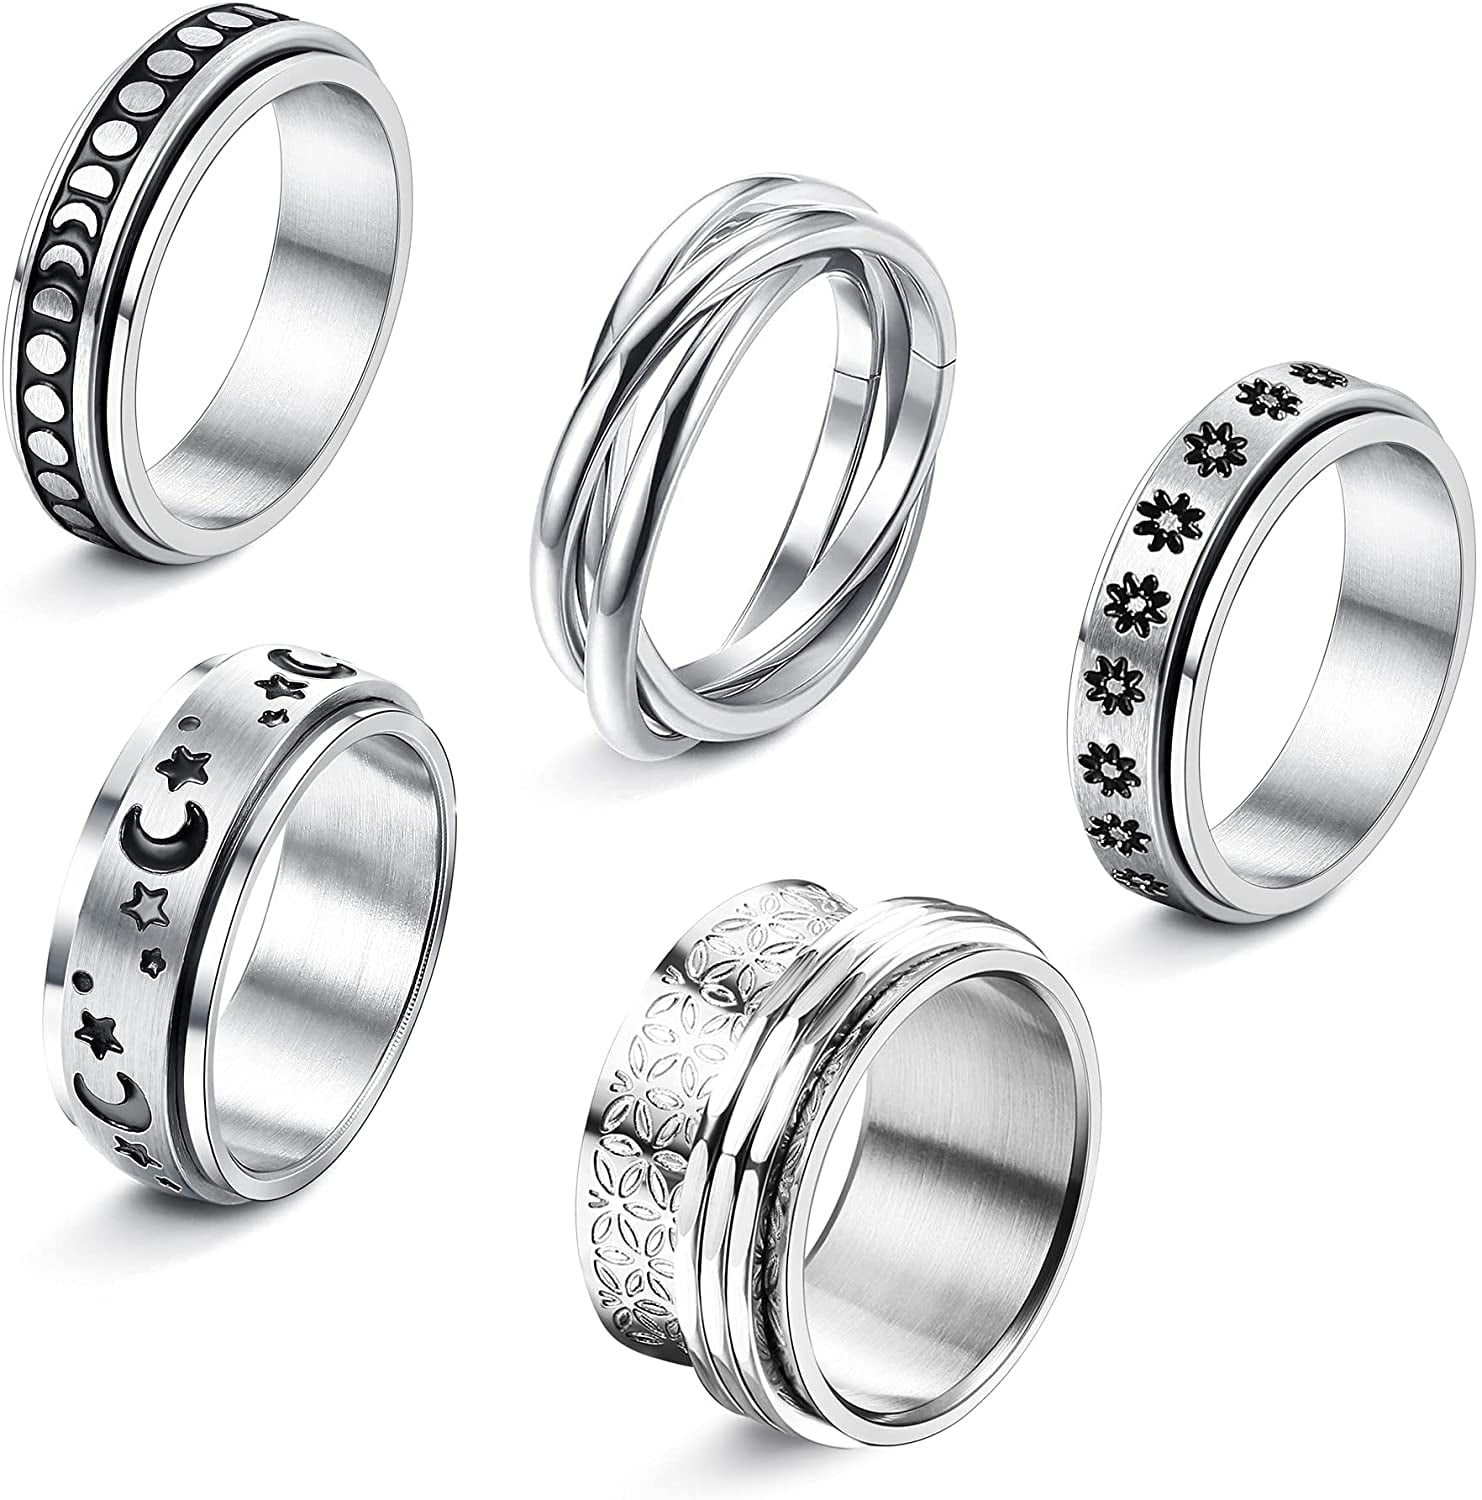 Jstyle Fidget Ring Spinner Ring Anxiety Ring Fidget Rings for Anxiety for Women Stainless Steel Rings a6789b8e 01b6 4271 bf22 9b1d1ec5d66f.2714ec63ed14a8d148852fd30dda90fd